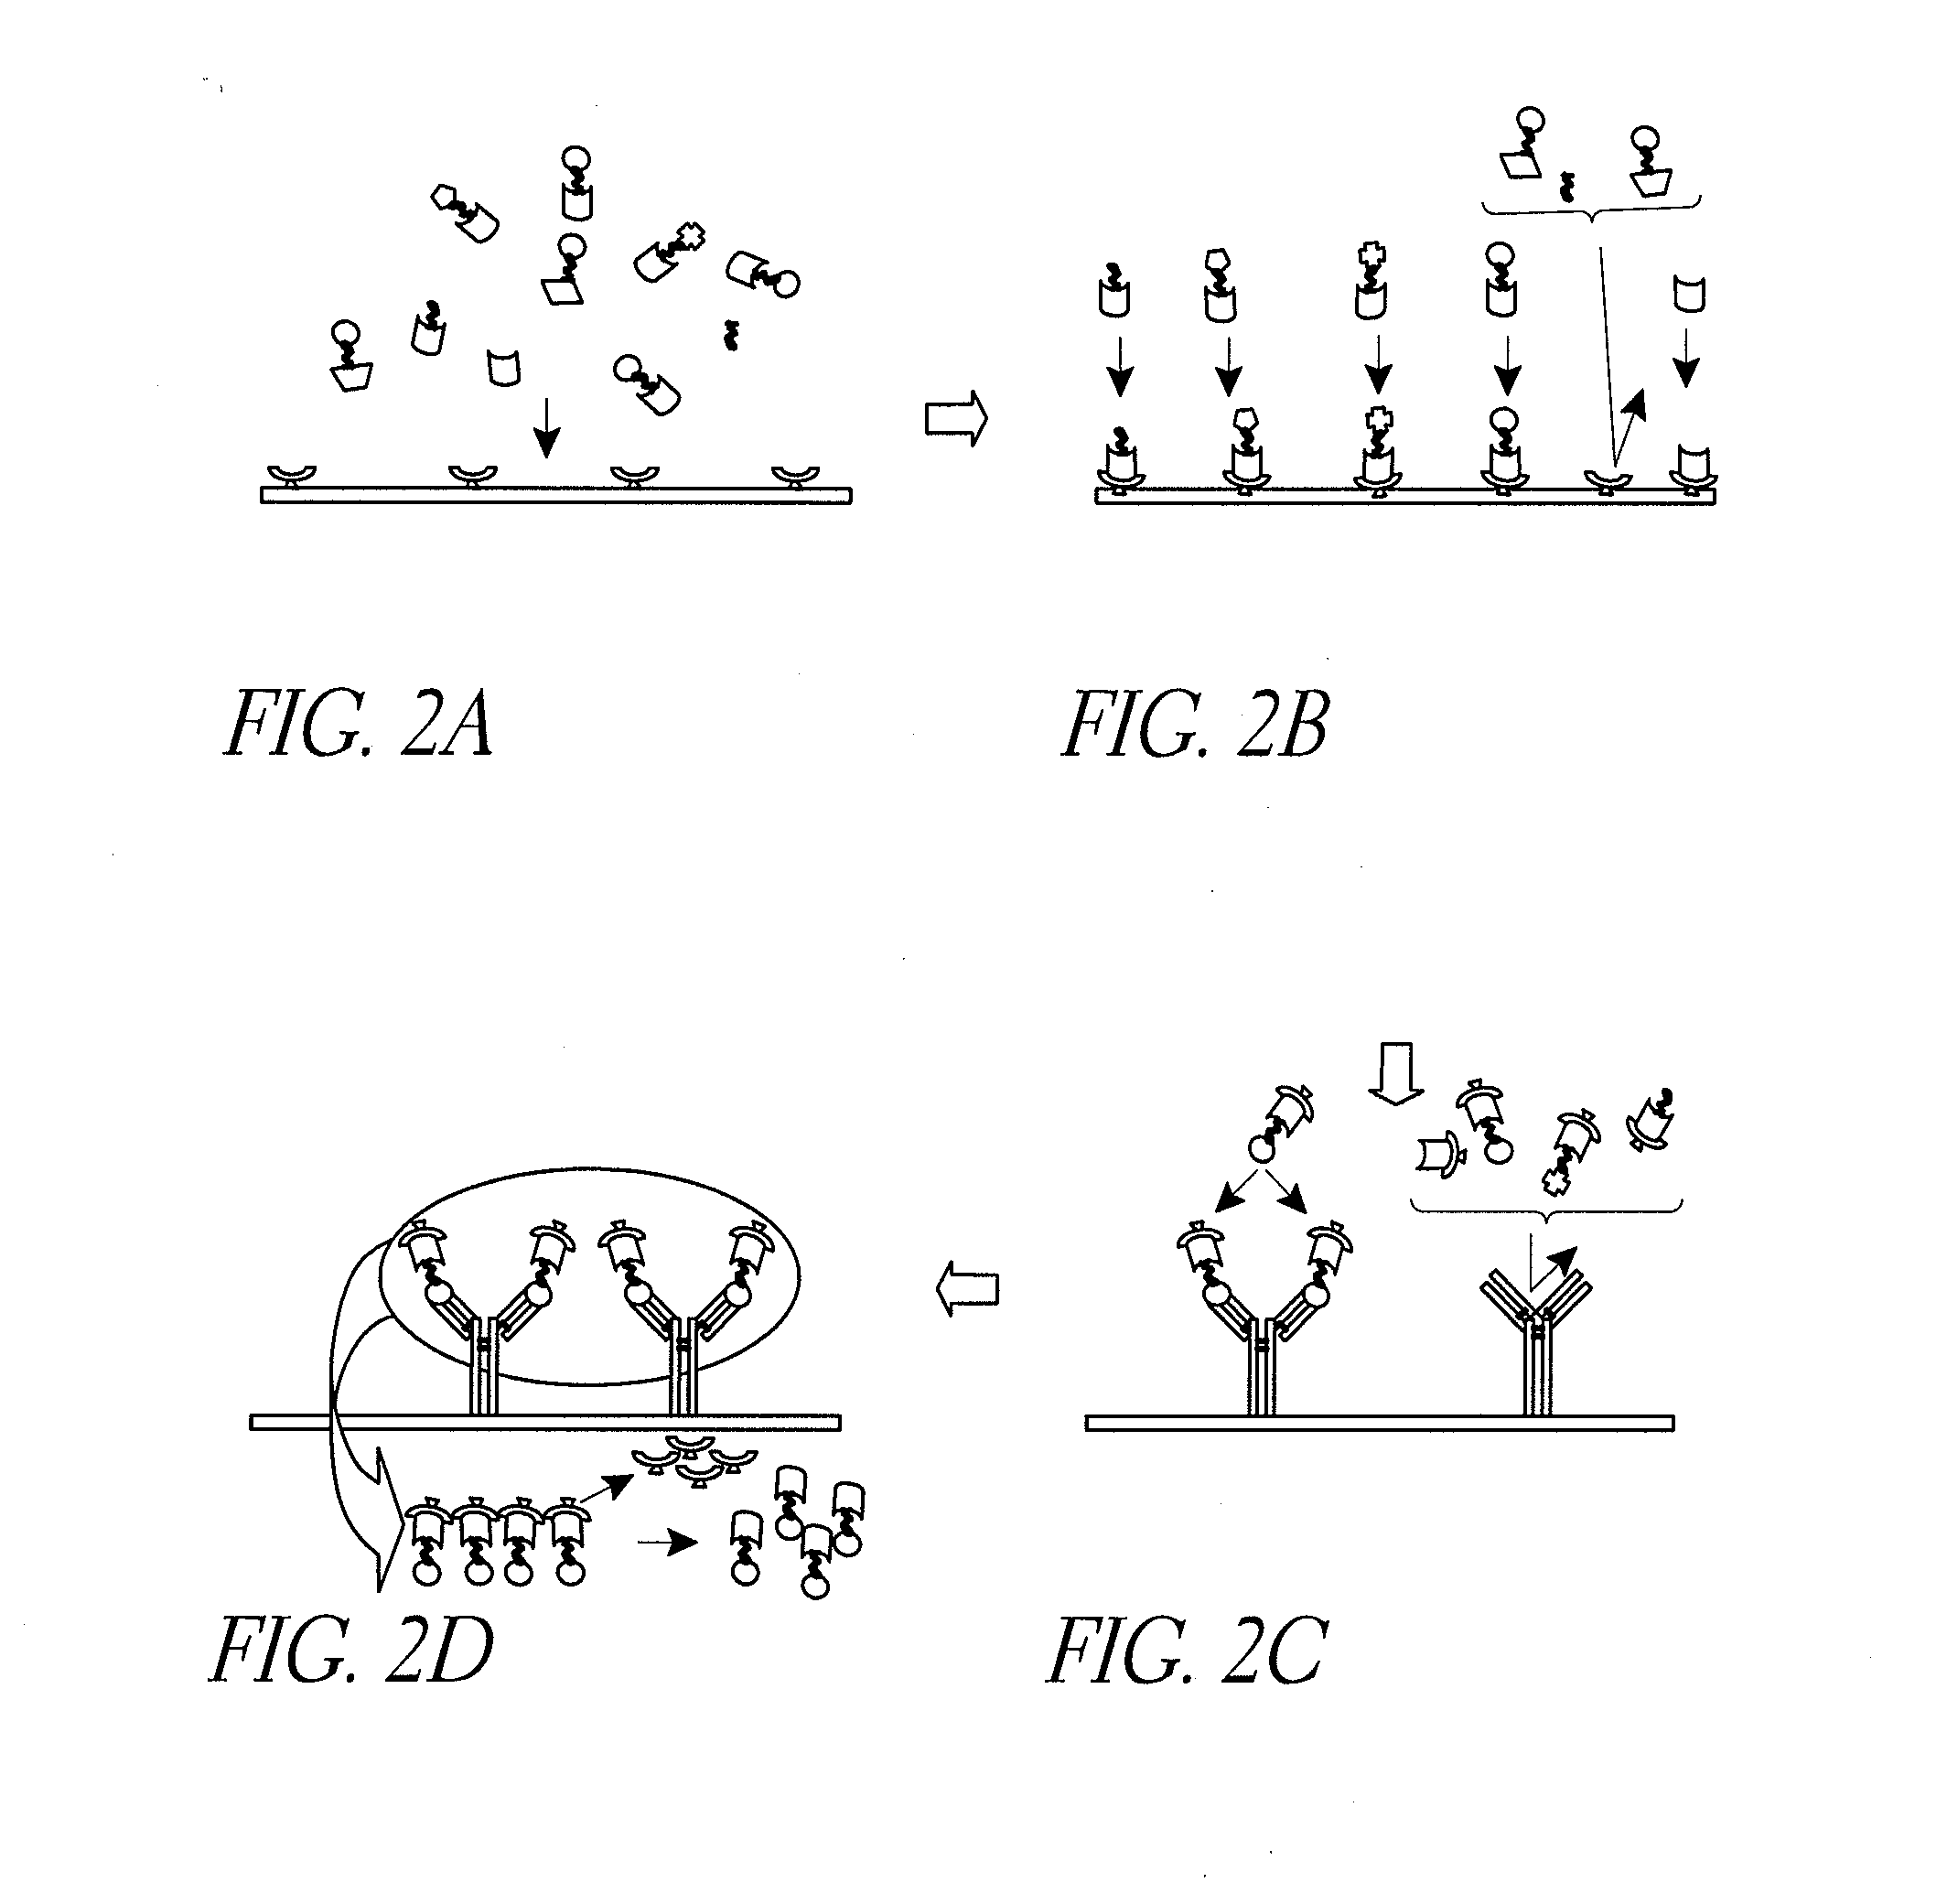 Method for making targeted therapeutic agents directed to soluble targets